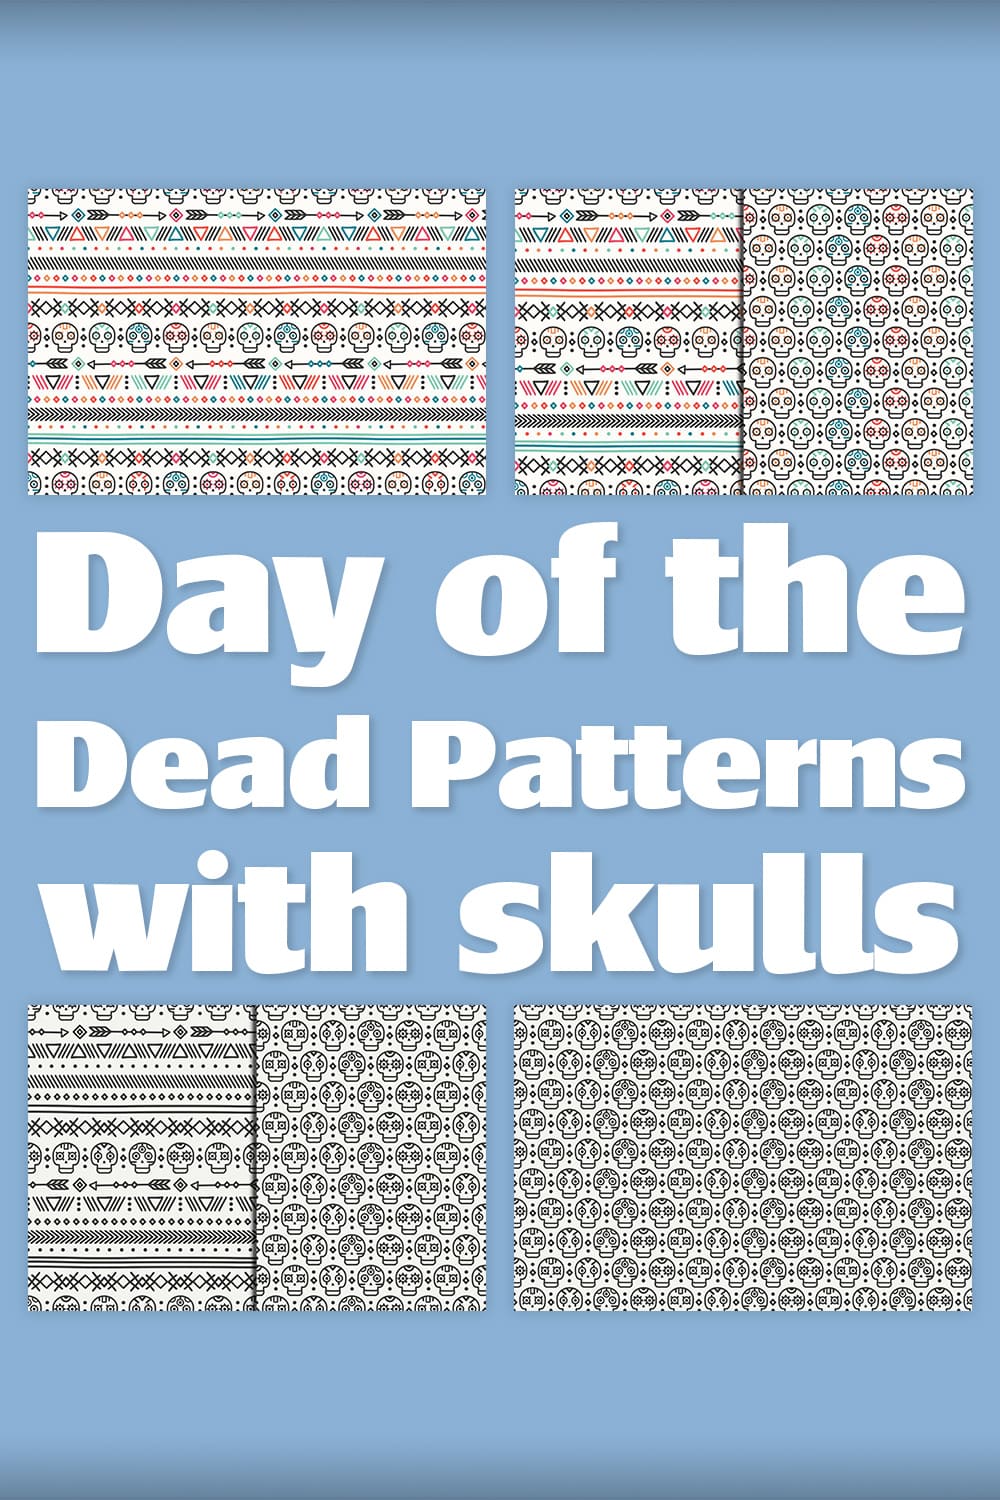 Day of the Dead Patterns with Skulls pinterest image.